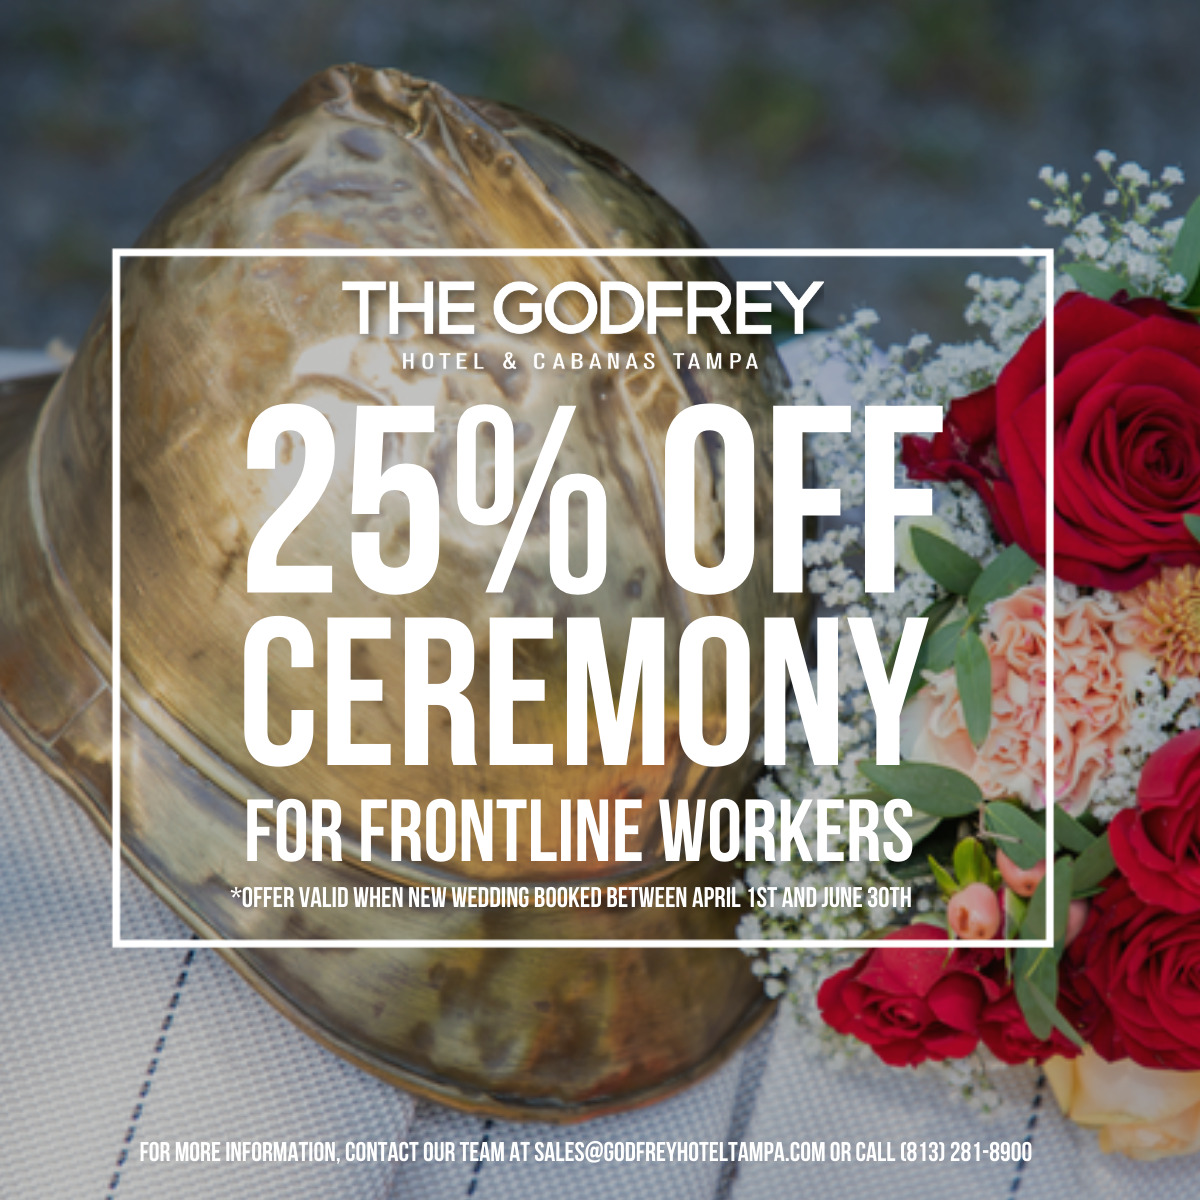 Godfrey Hotel & Cabanas Gives Back to Frontline Workers in the Spirit of Love